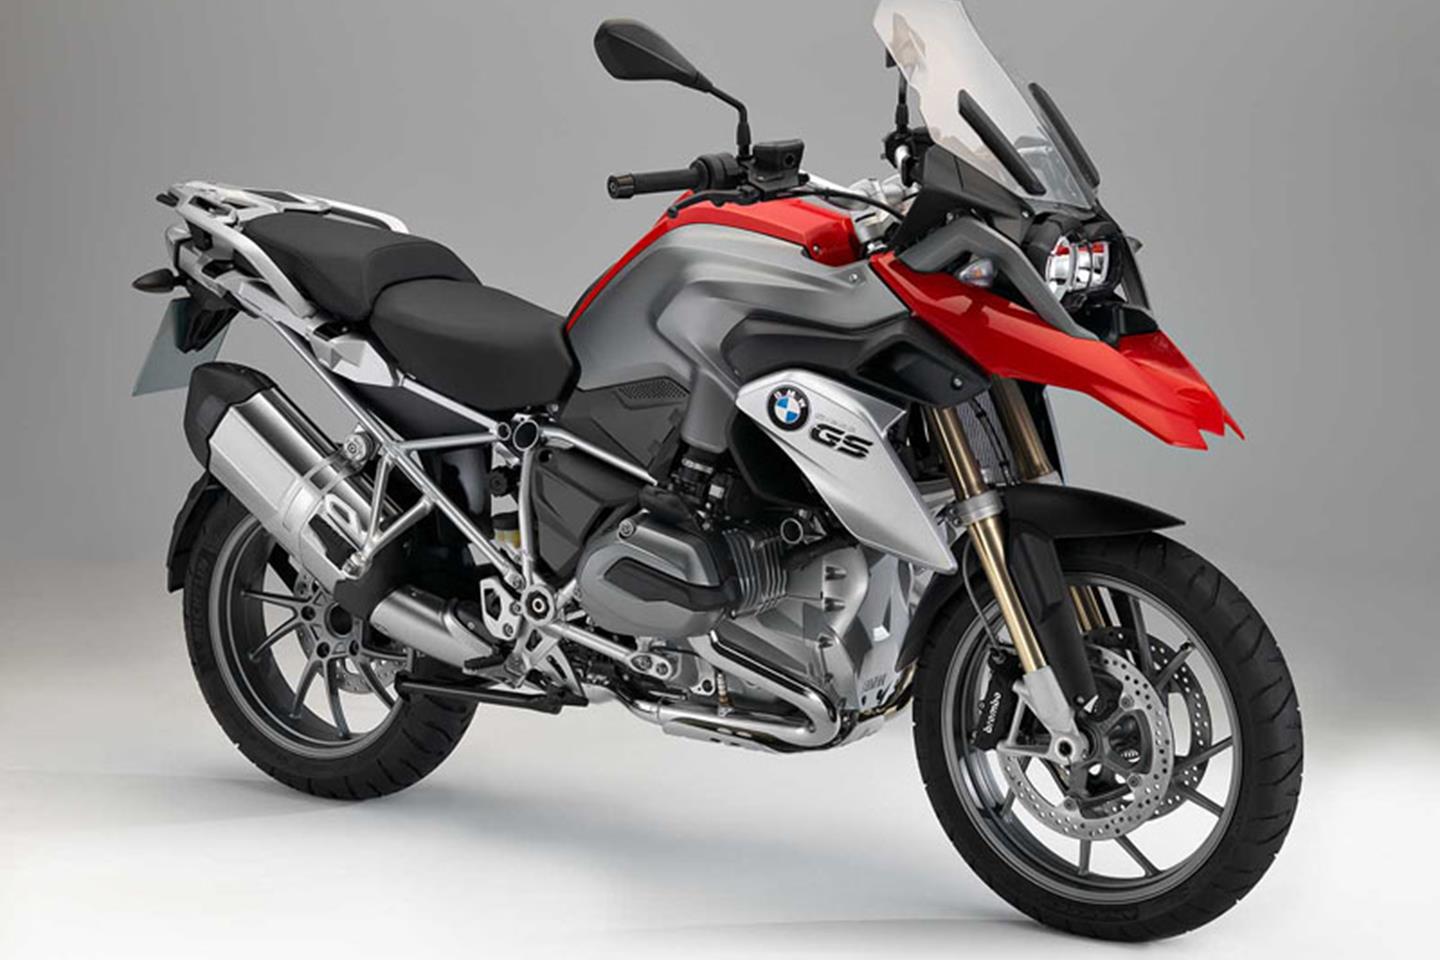 BMW R1200GS (2013-2016) Review | Speed 